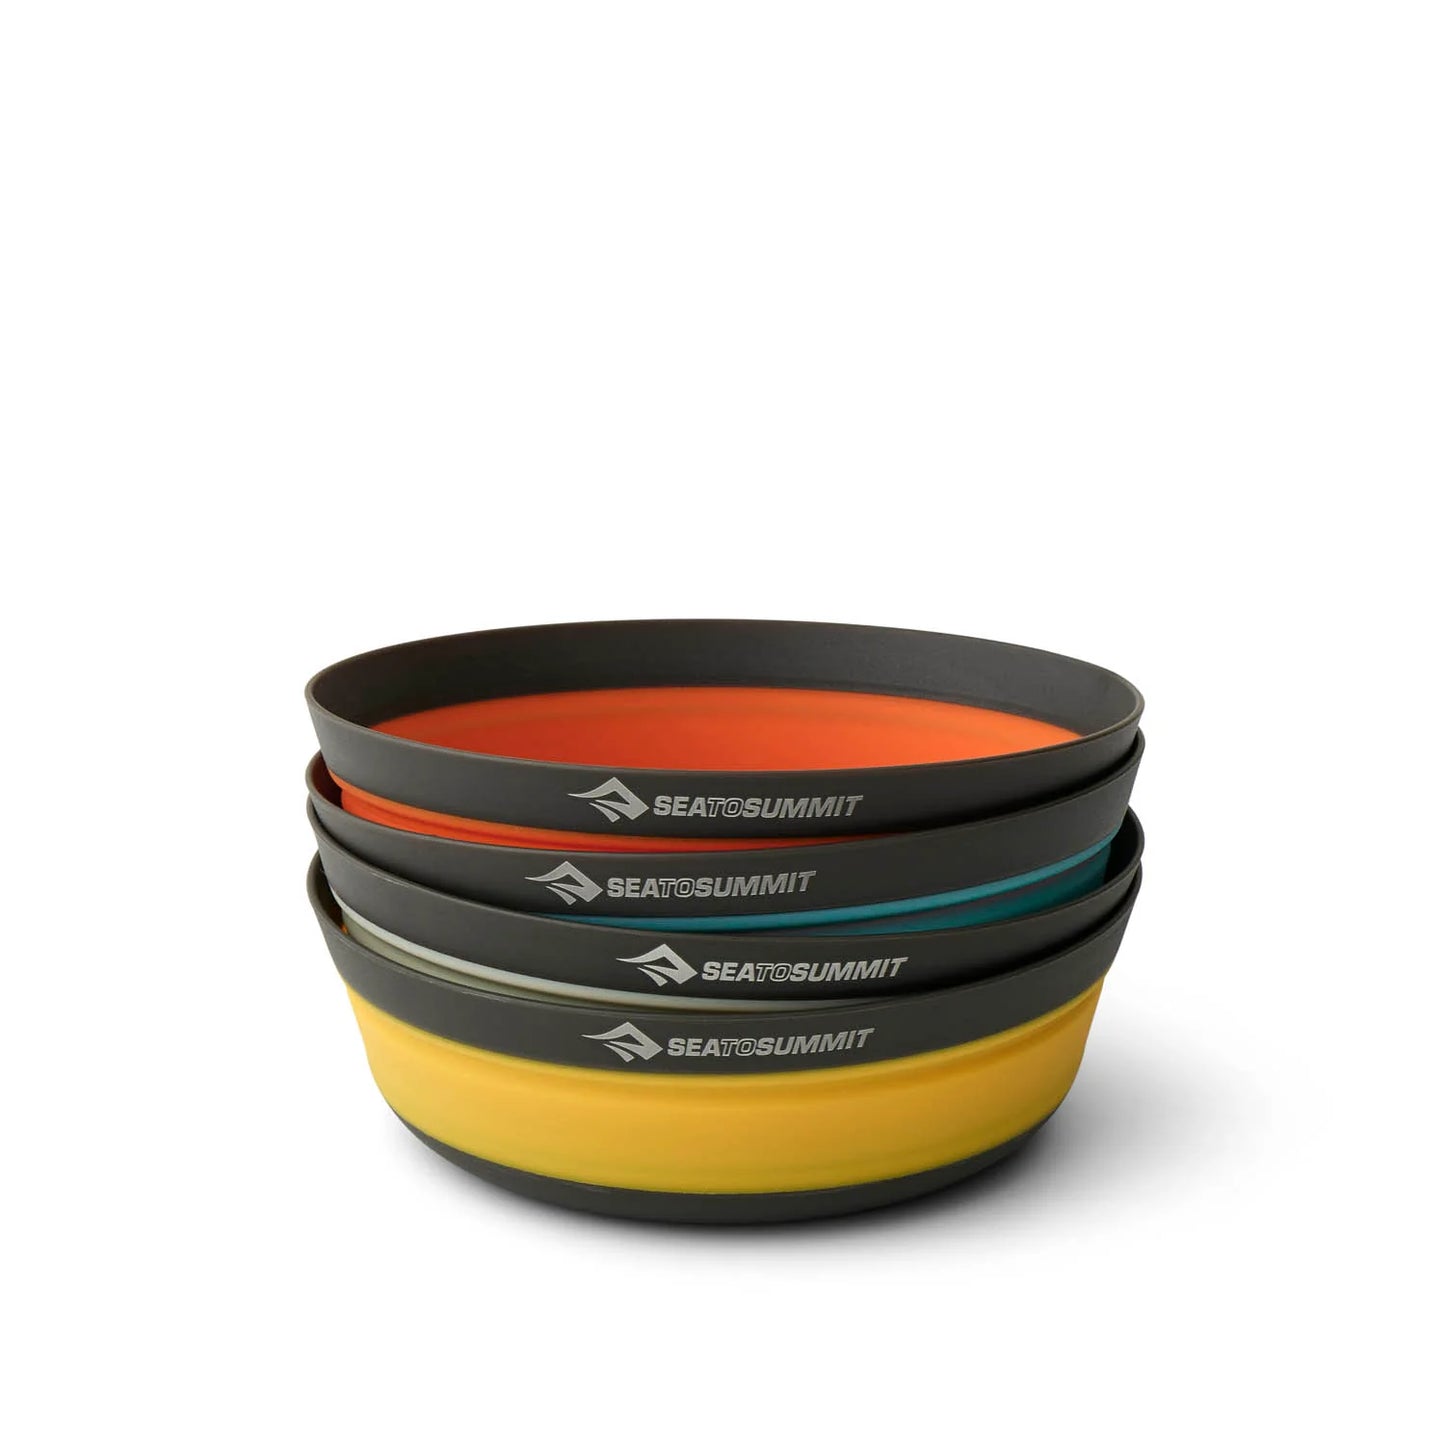 Sea To Summit Frontier UL Collapsible Bowl - L - Orange